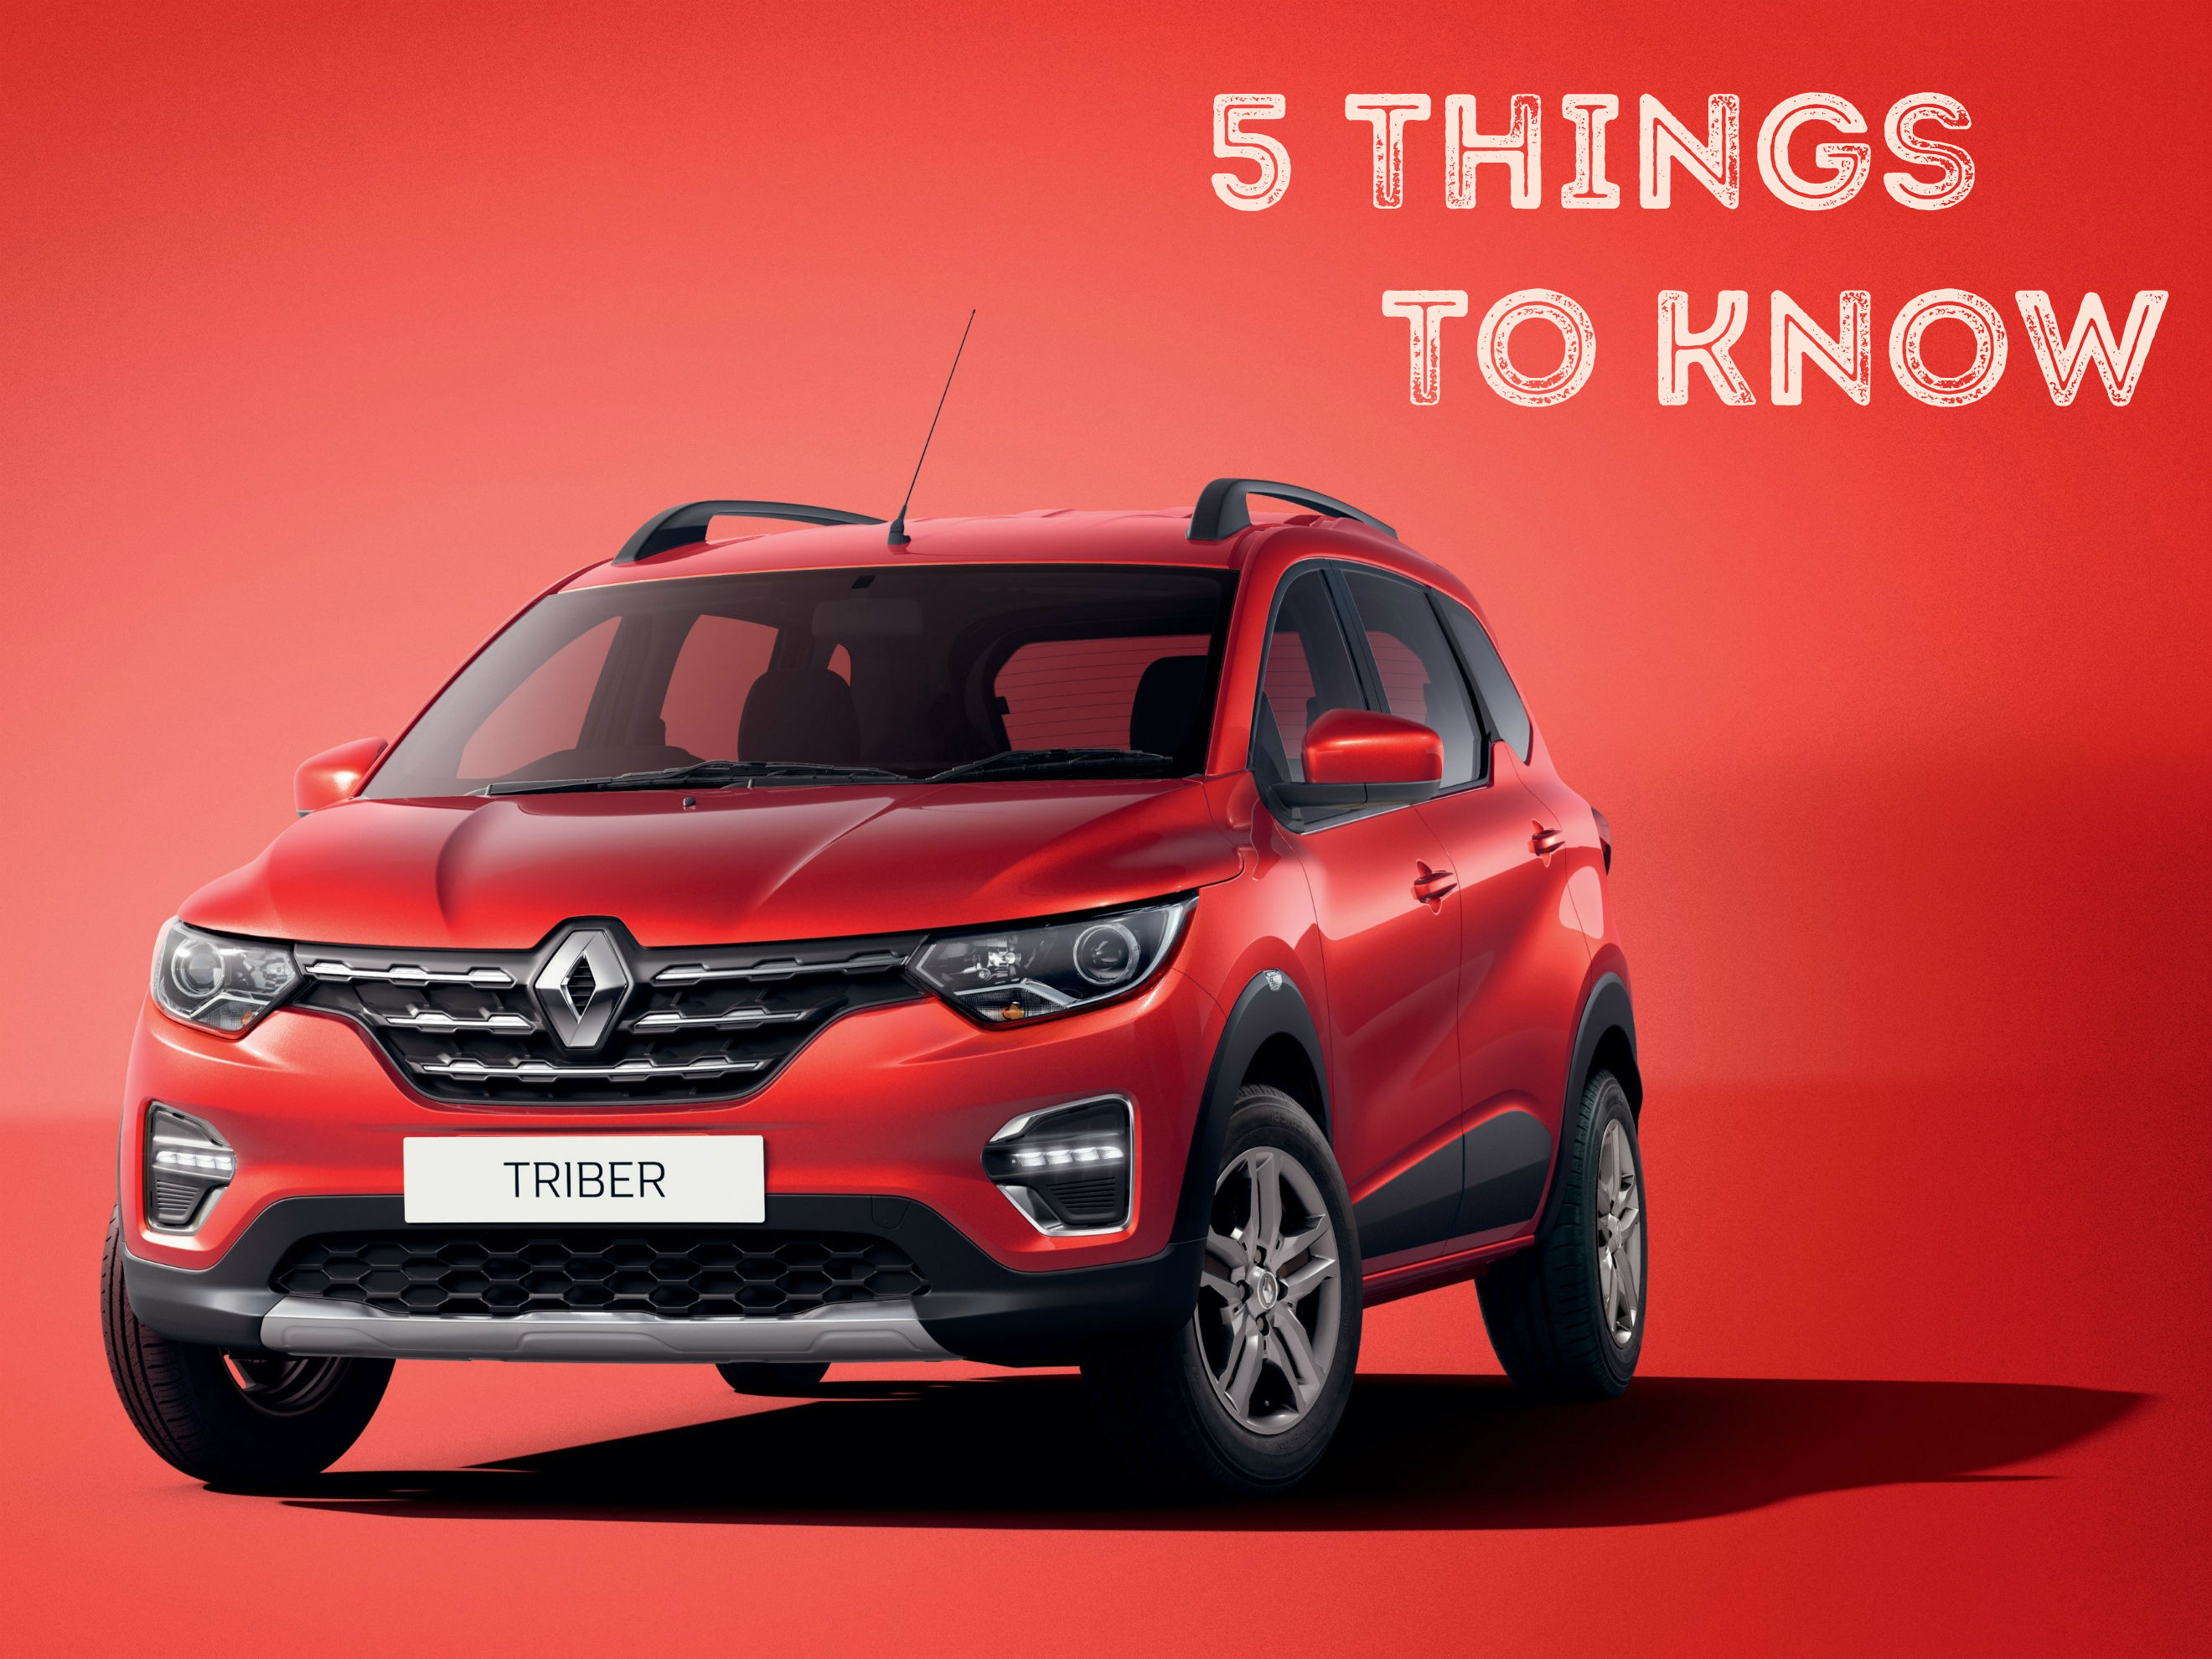 Renault Triber 7-seater MPV: 5 Things To Know - ZigWheels